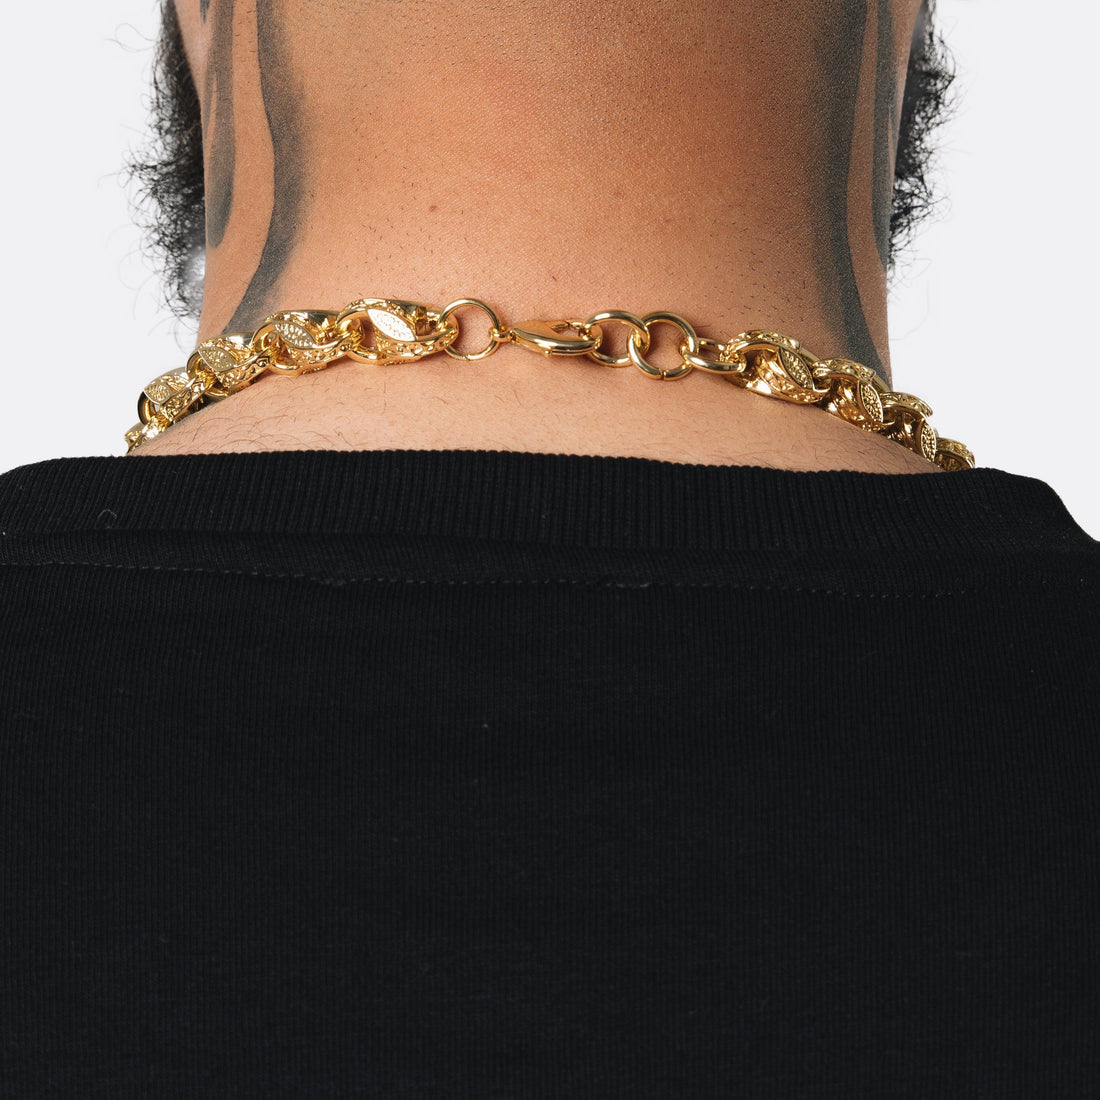 Gold Dipped Tulip Chain 13mm - Gold